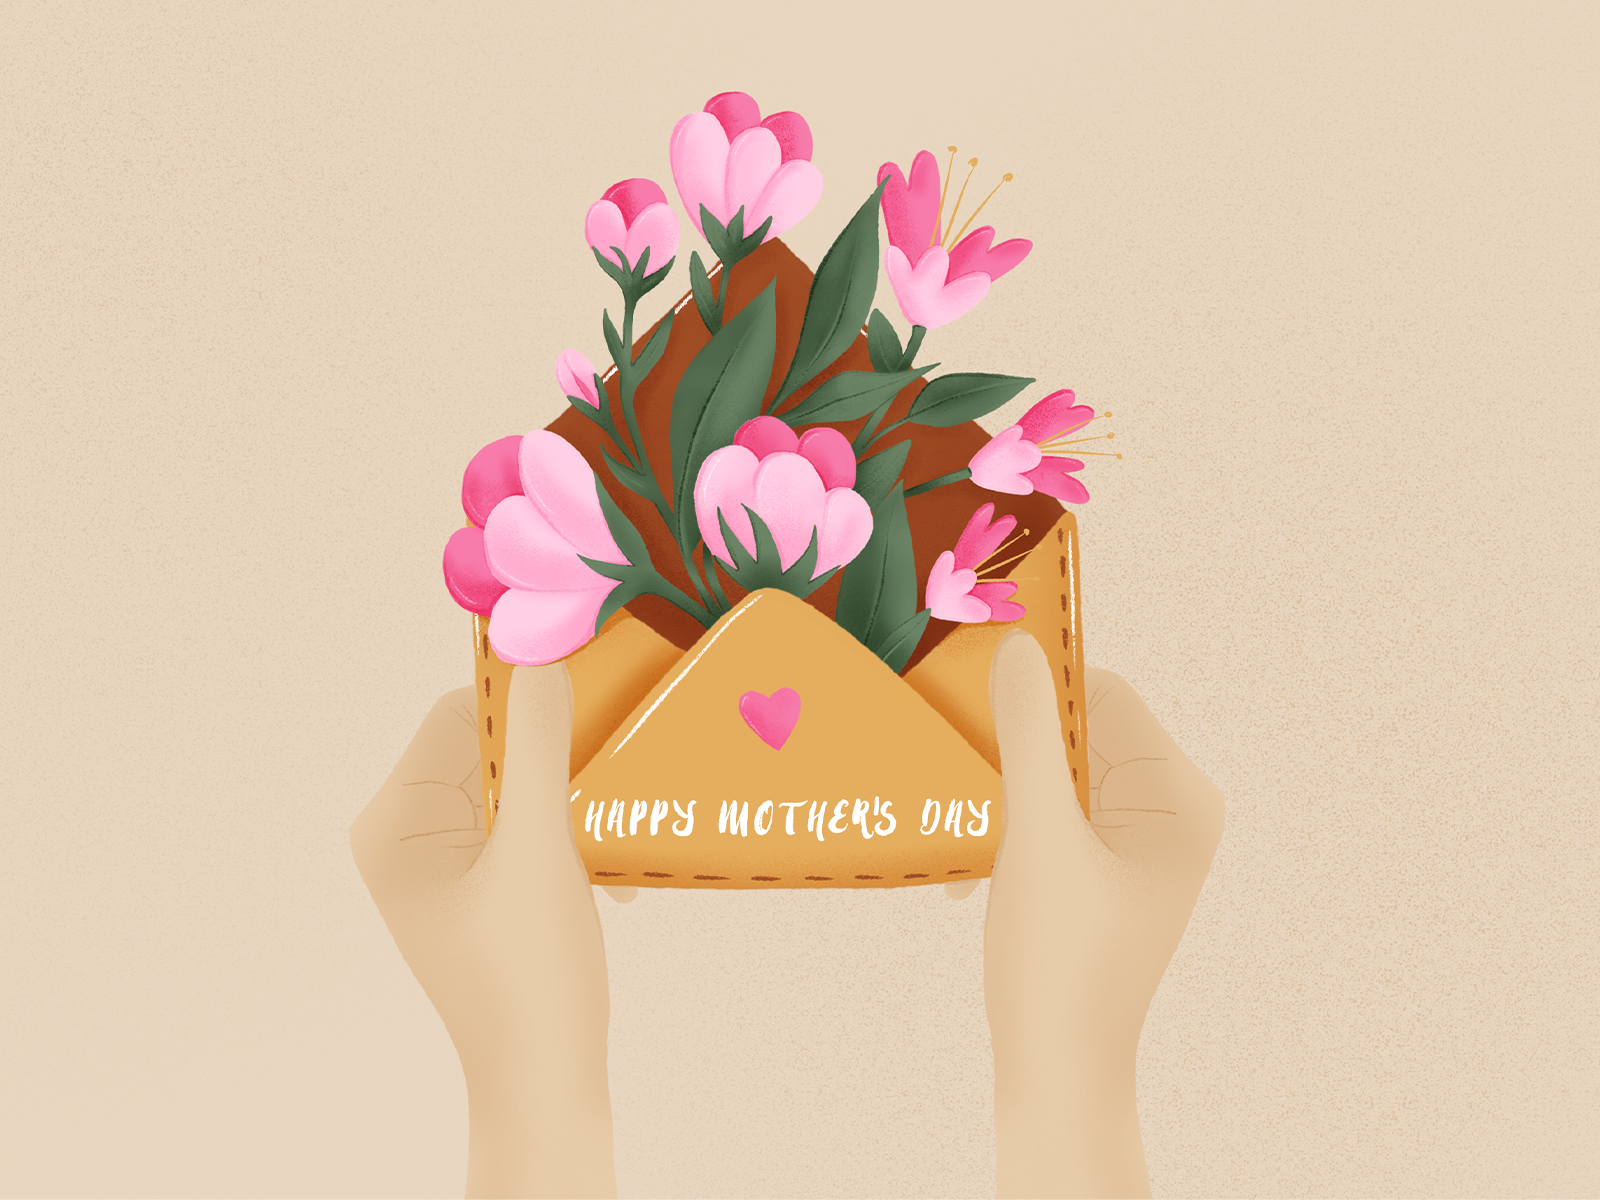 Happy Mother's Day 2021 wallpaper